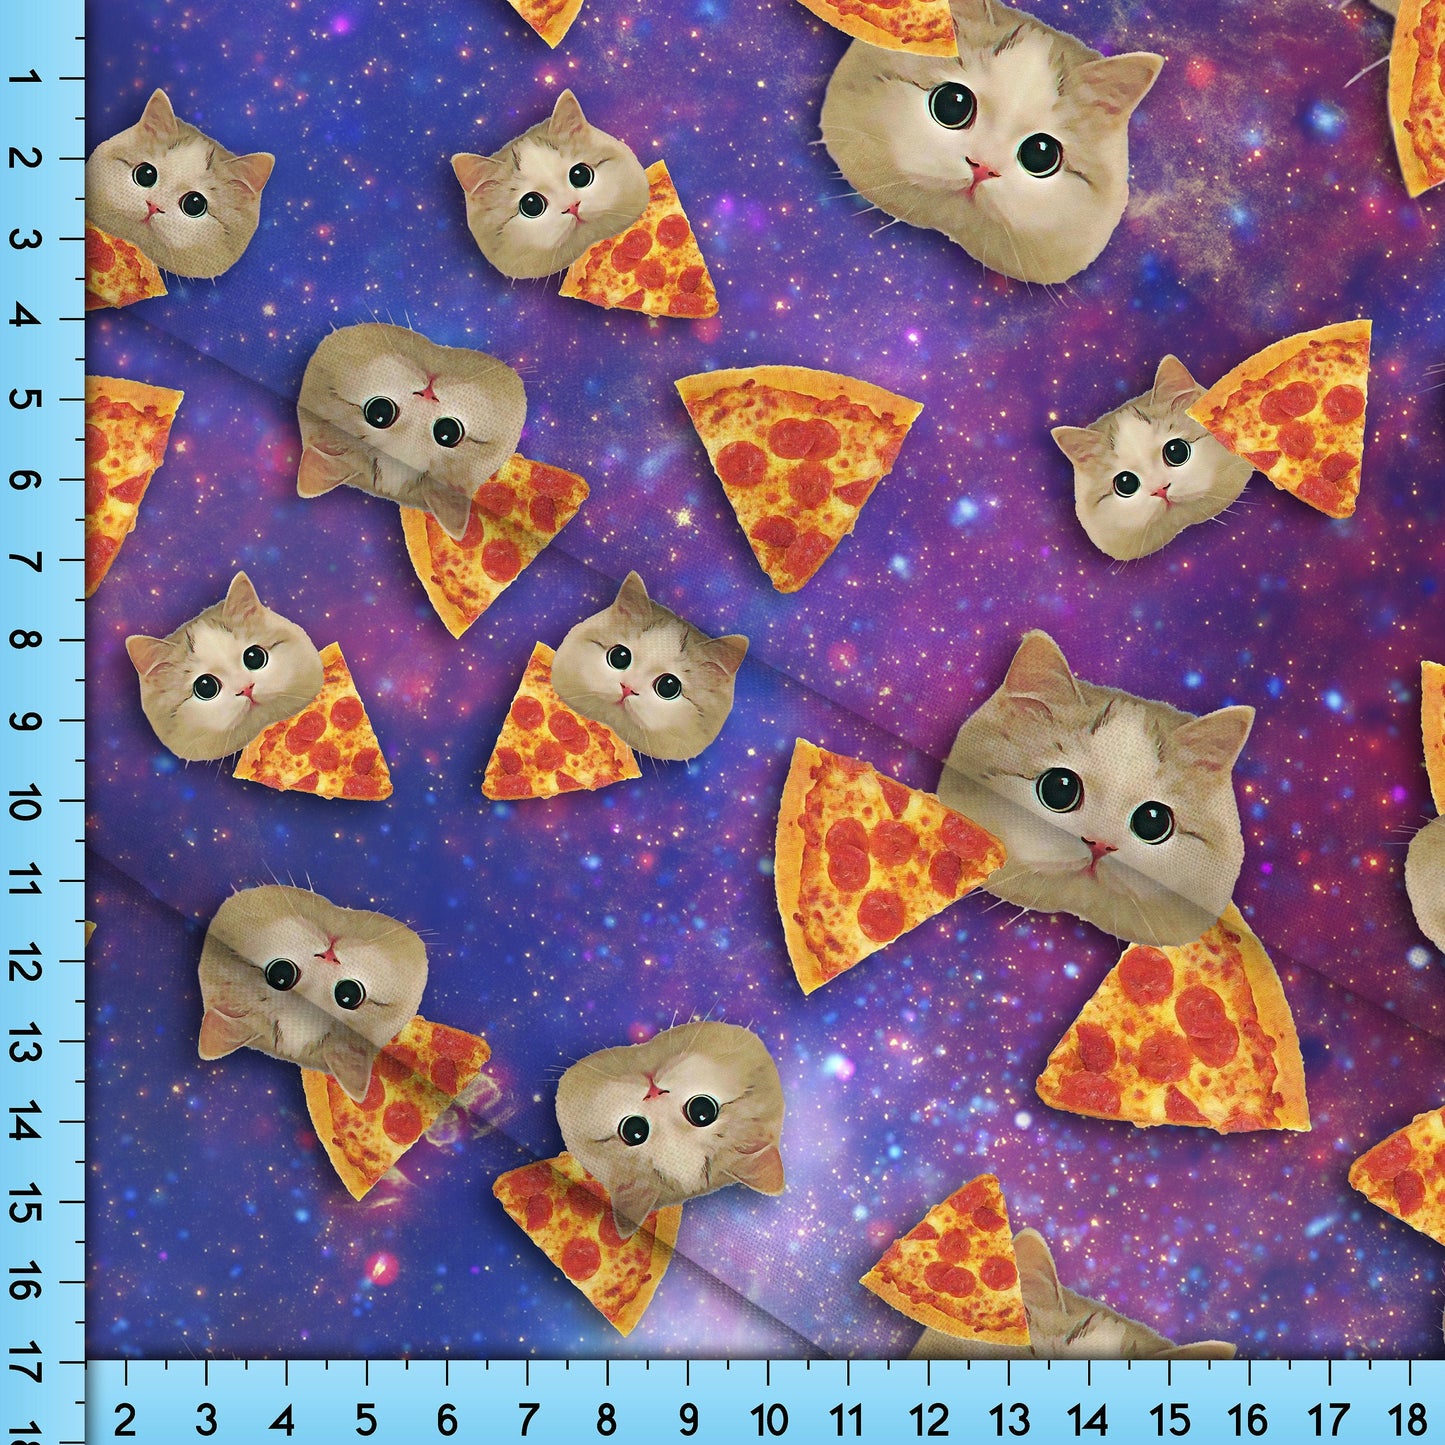 Kittens and Pizza in Space Fabric Printed By the Yard. Broadcloth, Poplin, Gabardine, Liverpool, Clothing and Craft Projects